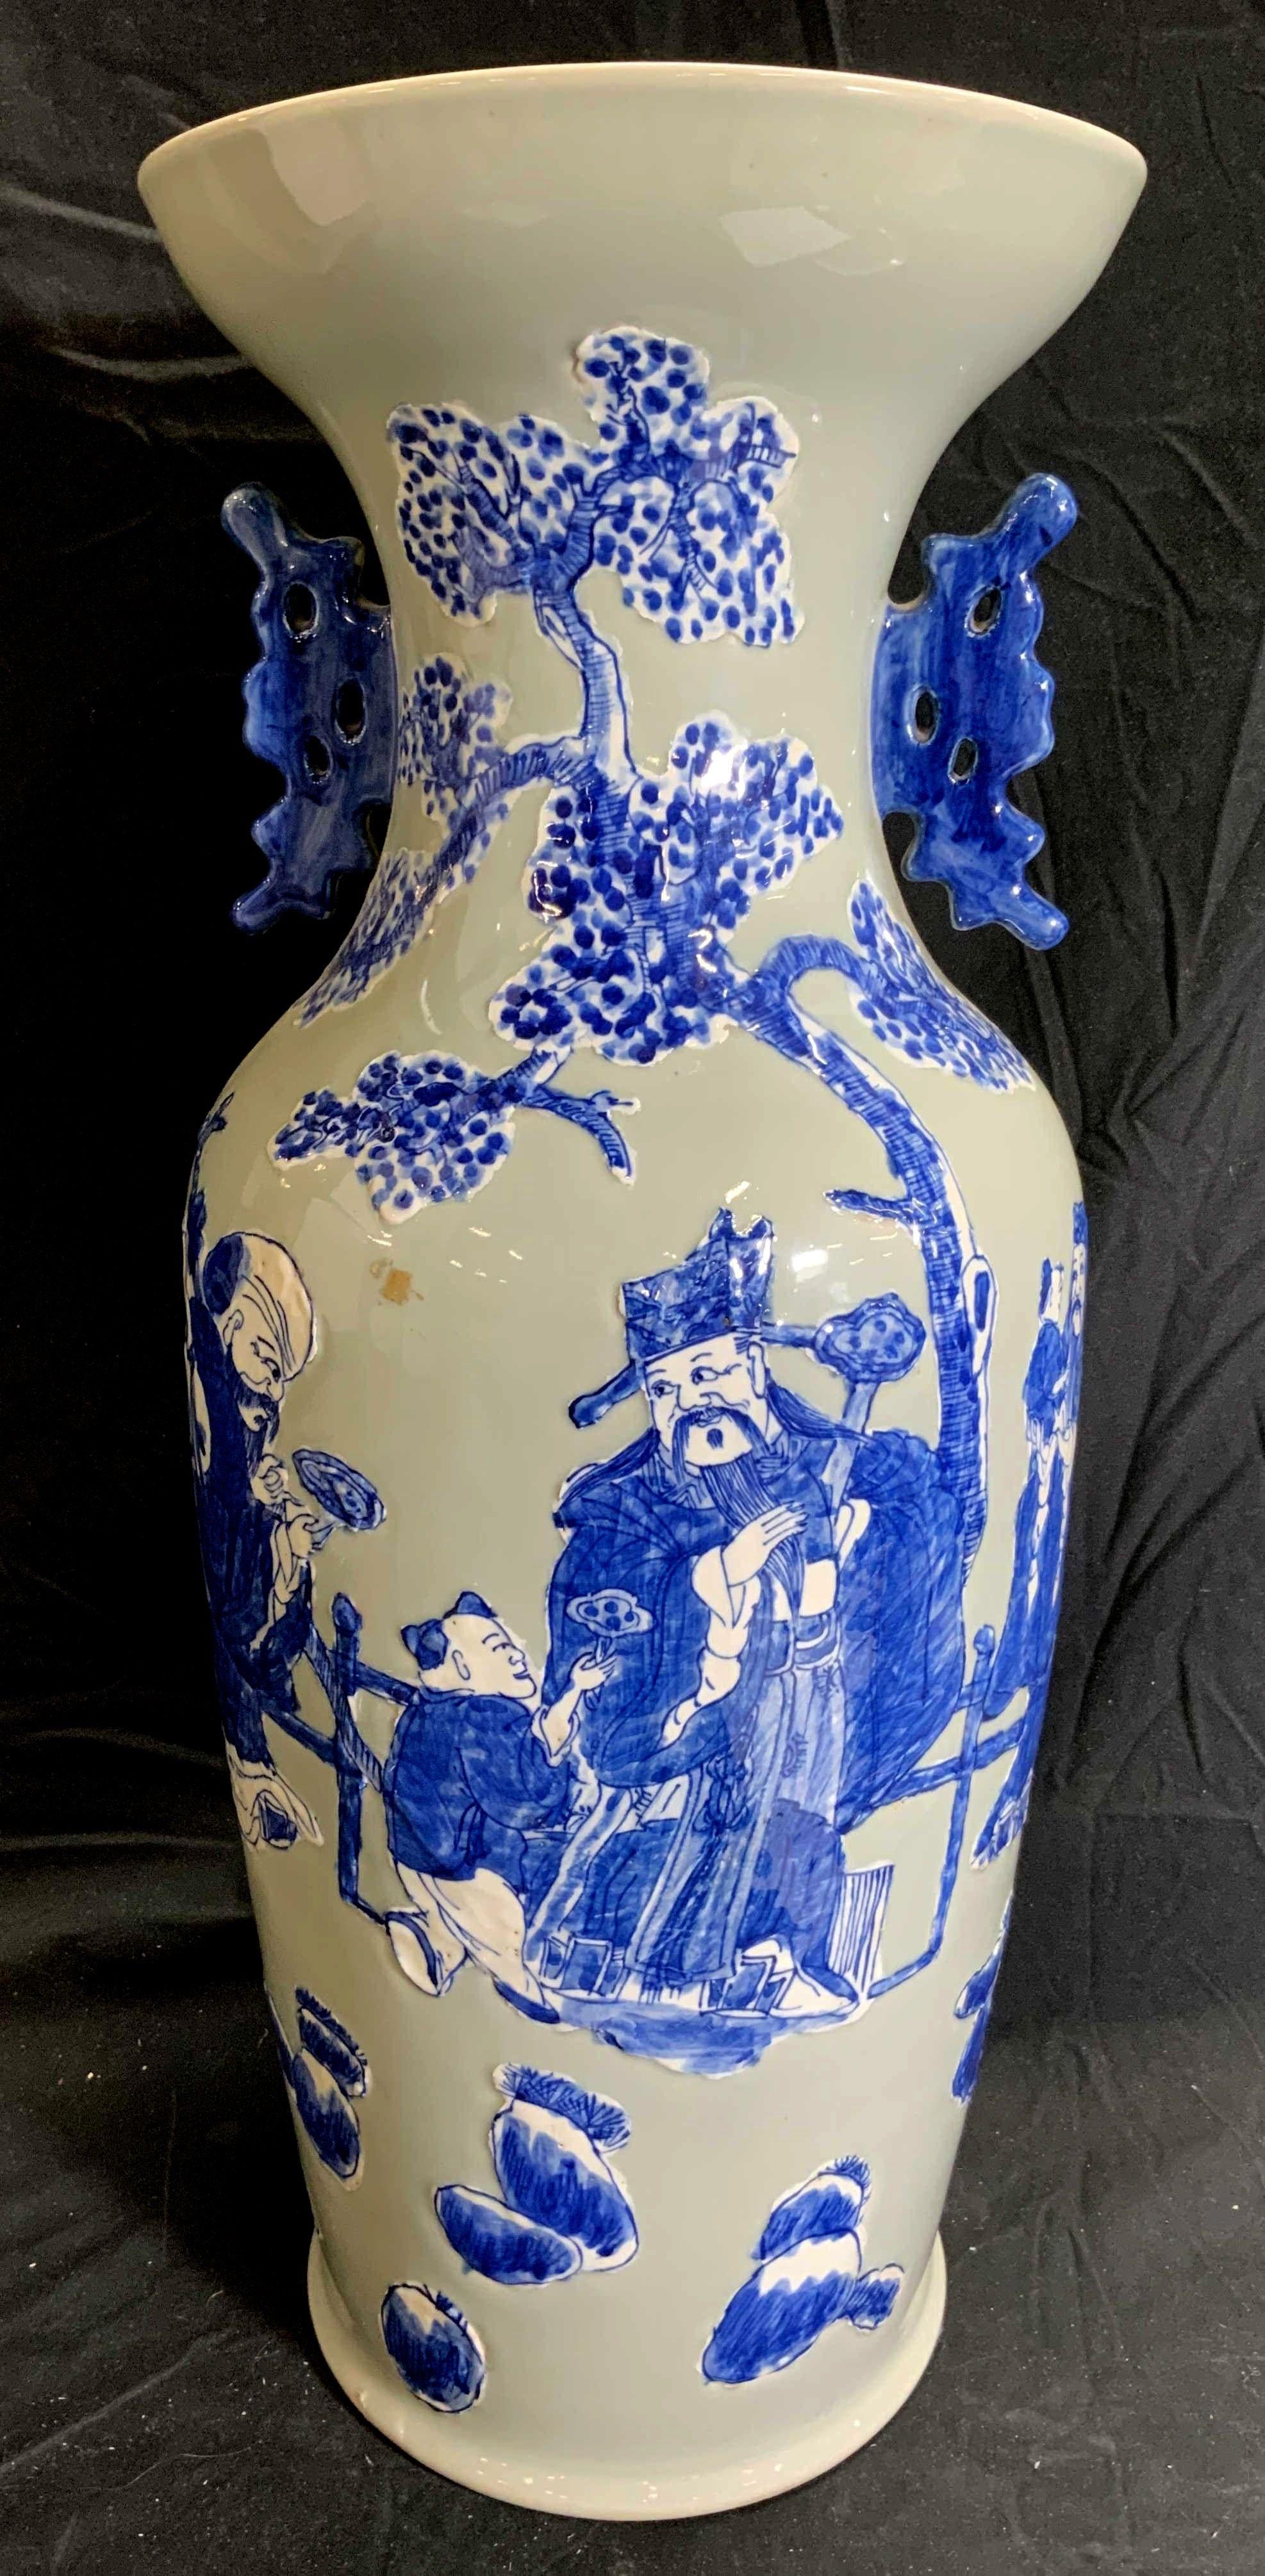 A charming and large Chinese Vase with blue and white celadon and blue-toned handles, depicting figural, rock, & tree details. The vase is porcelain and measures approx 23.25 inches tall and 9 inches wide.

 